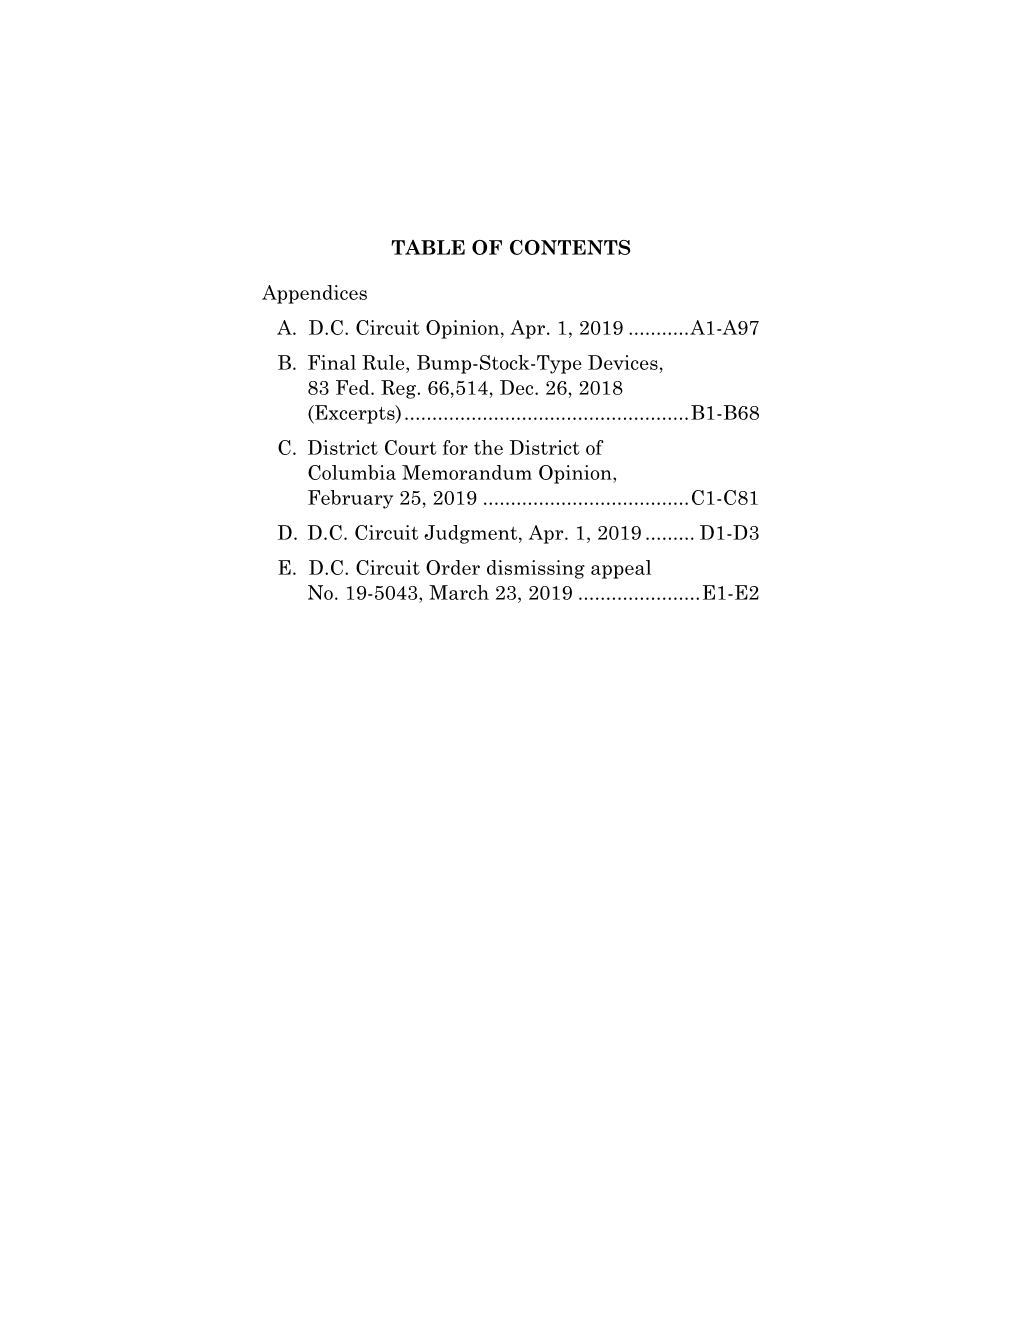 TABLE of CONTENTS Appendices A. D.C. Circuit Opinion, Apr. 1